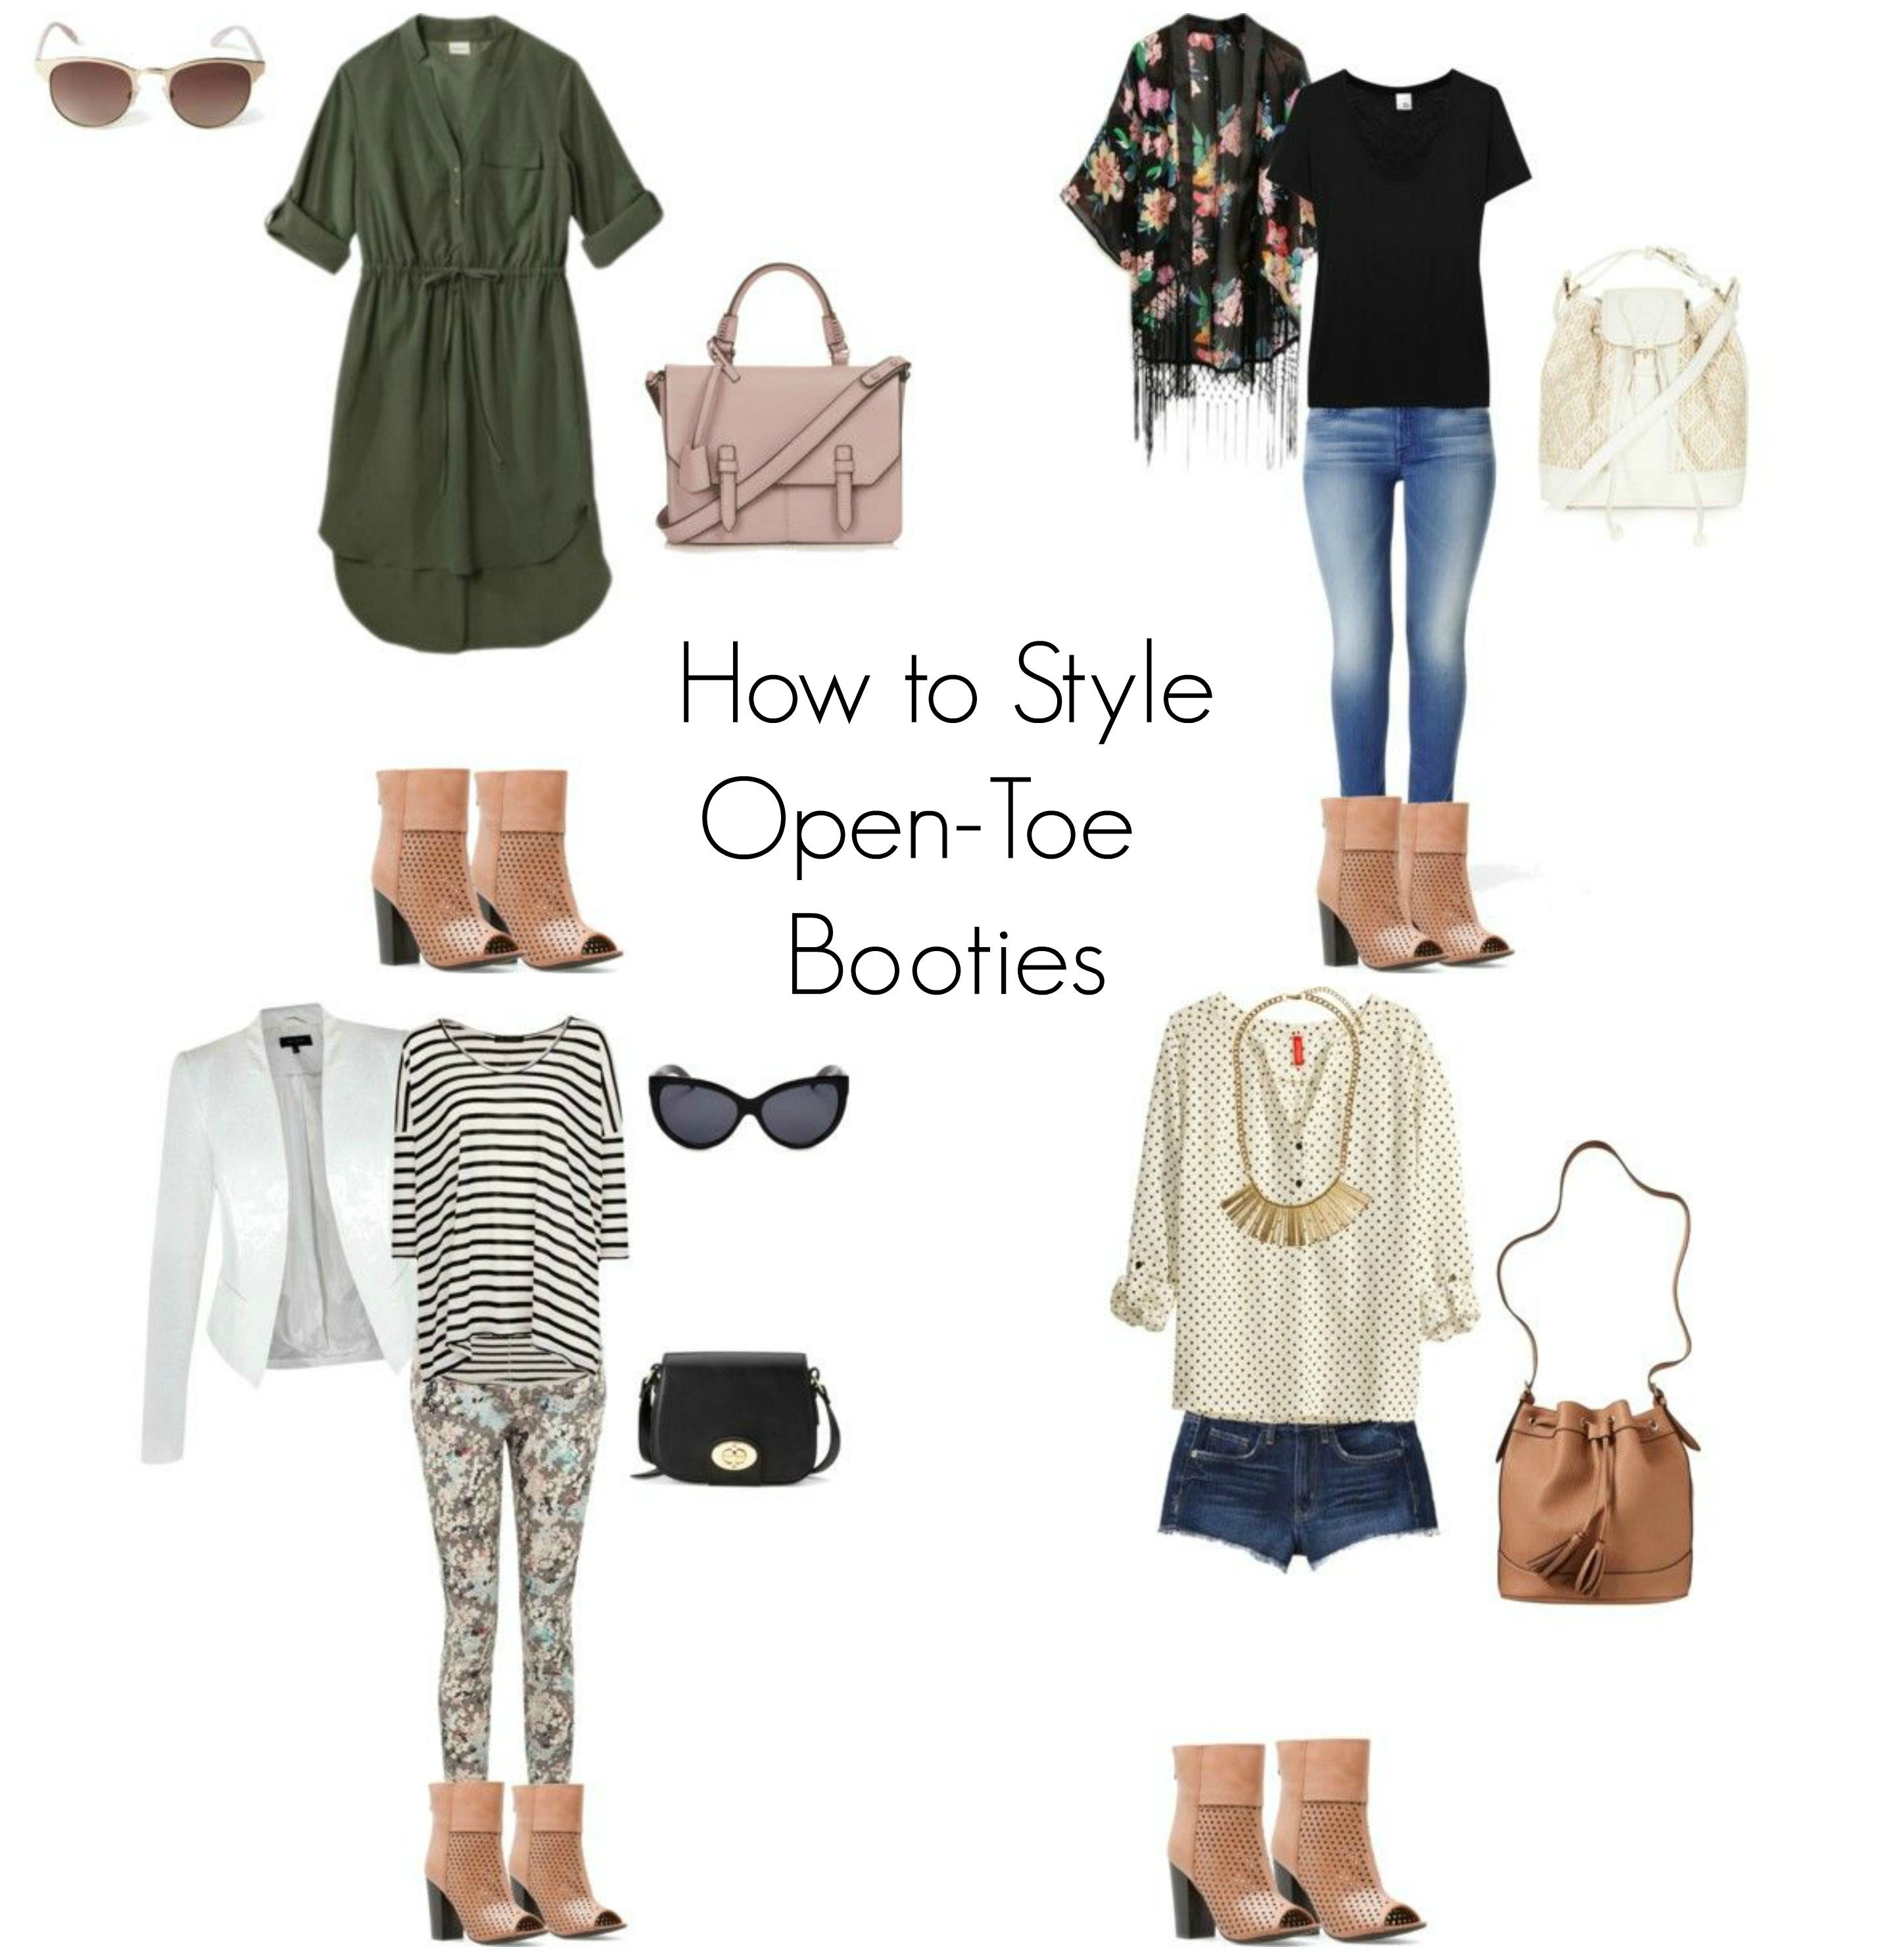 How to Style Open-Toe Booties